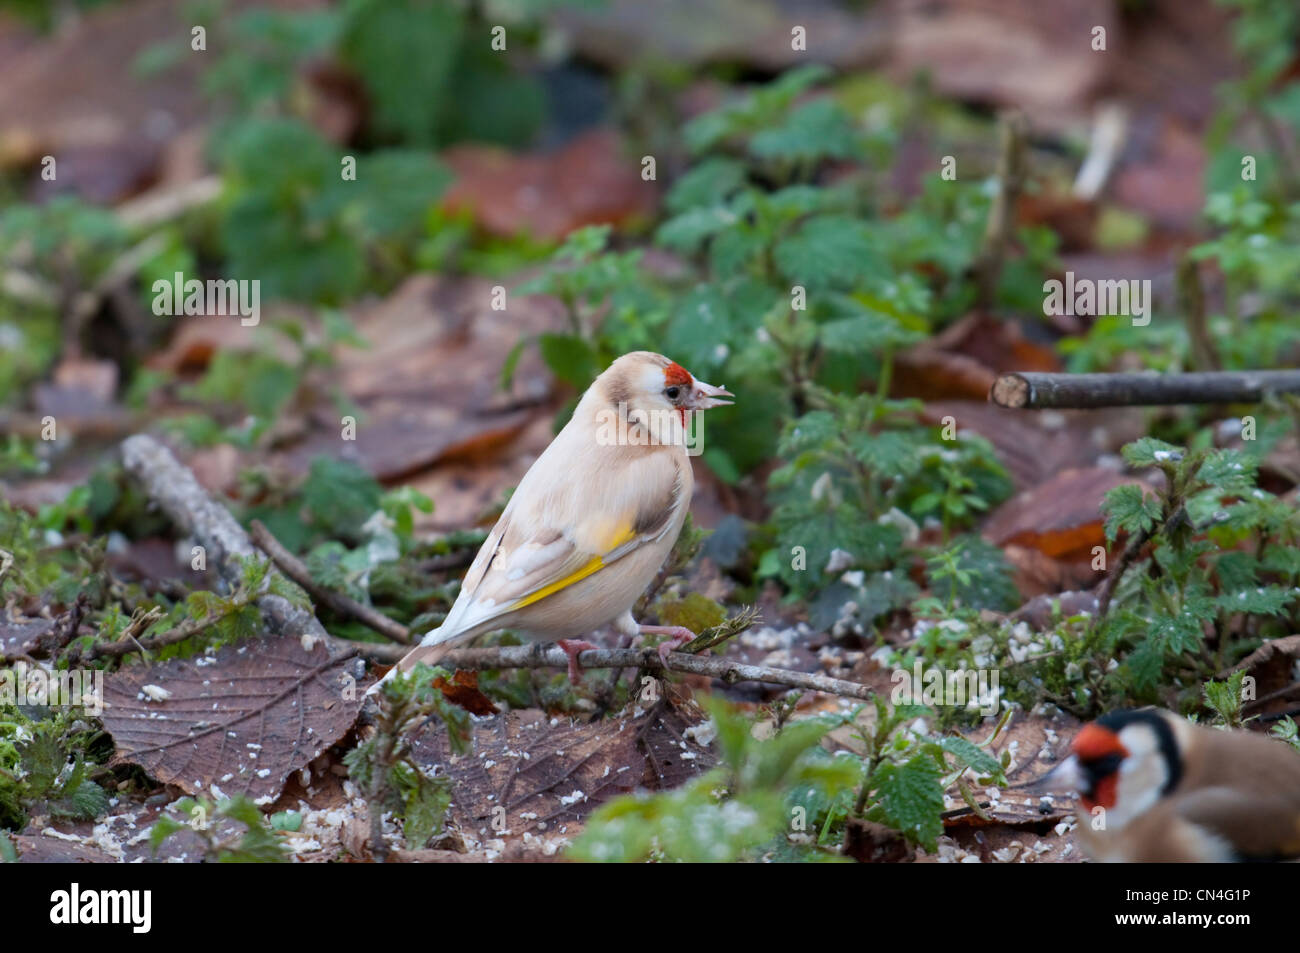 Goldfinch showing signs on leucism which affects pigment in feathers. Salehurst, Sussex, UK Stock Photo